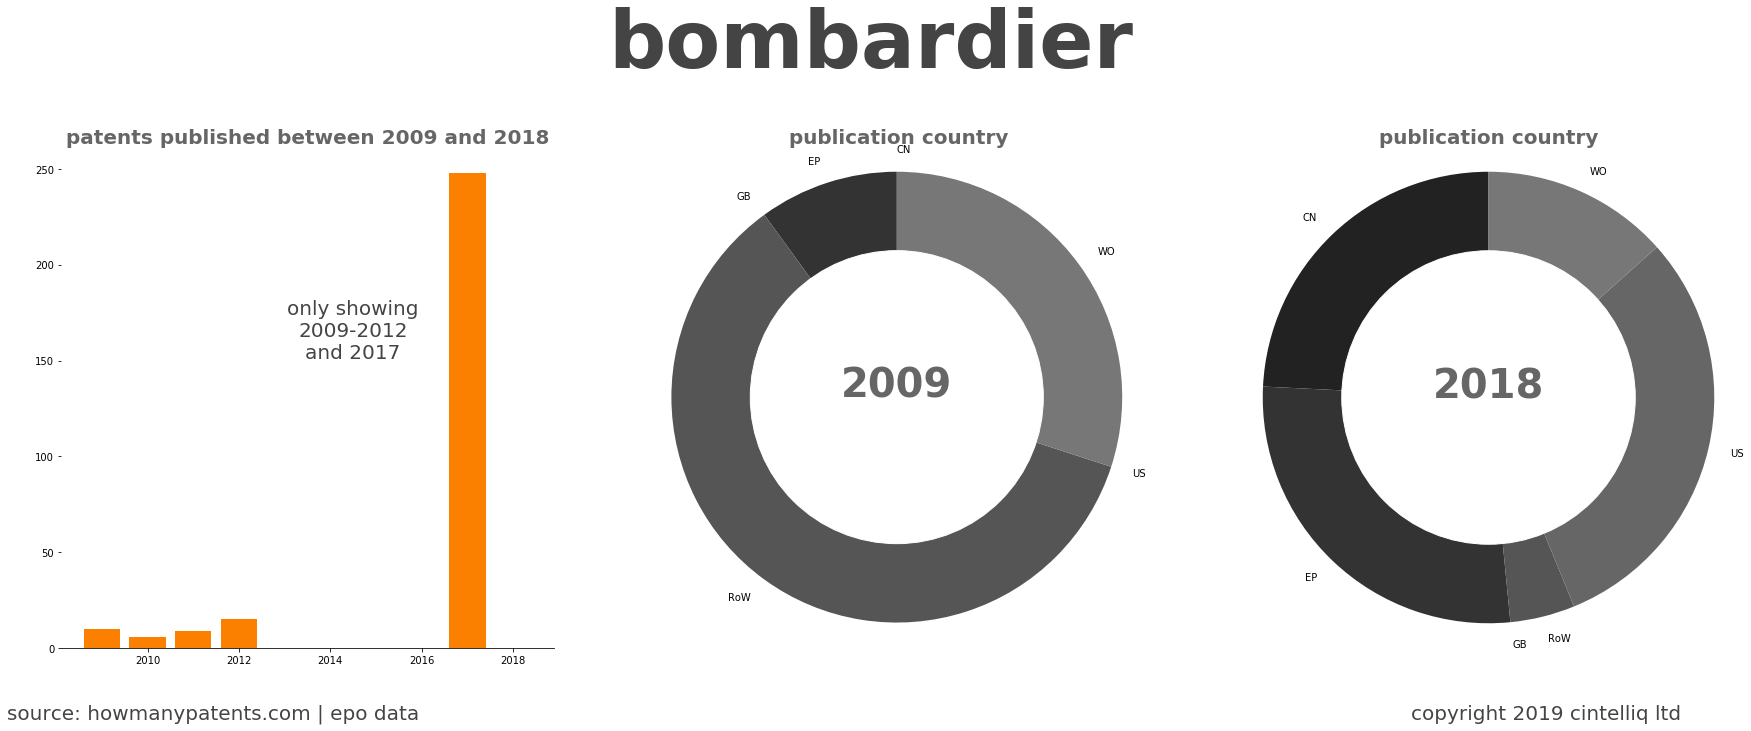 summary of patents for Bombardier